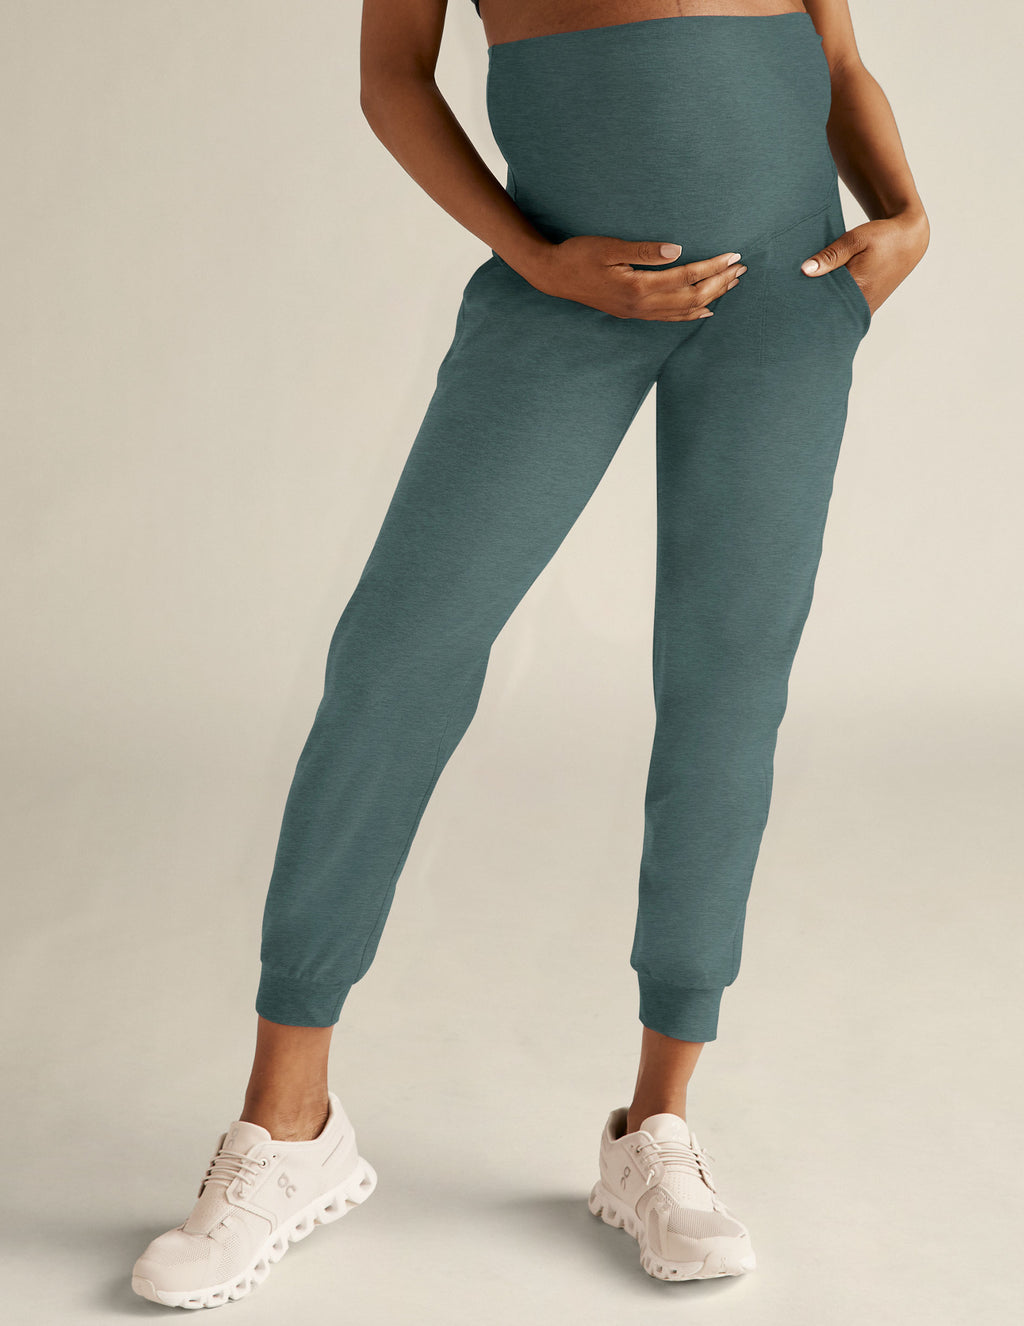 Spacedye Beyond the Bump Maternity Midi Jogger Featured Image